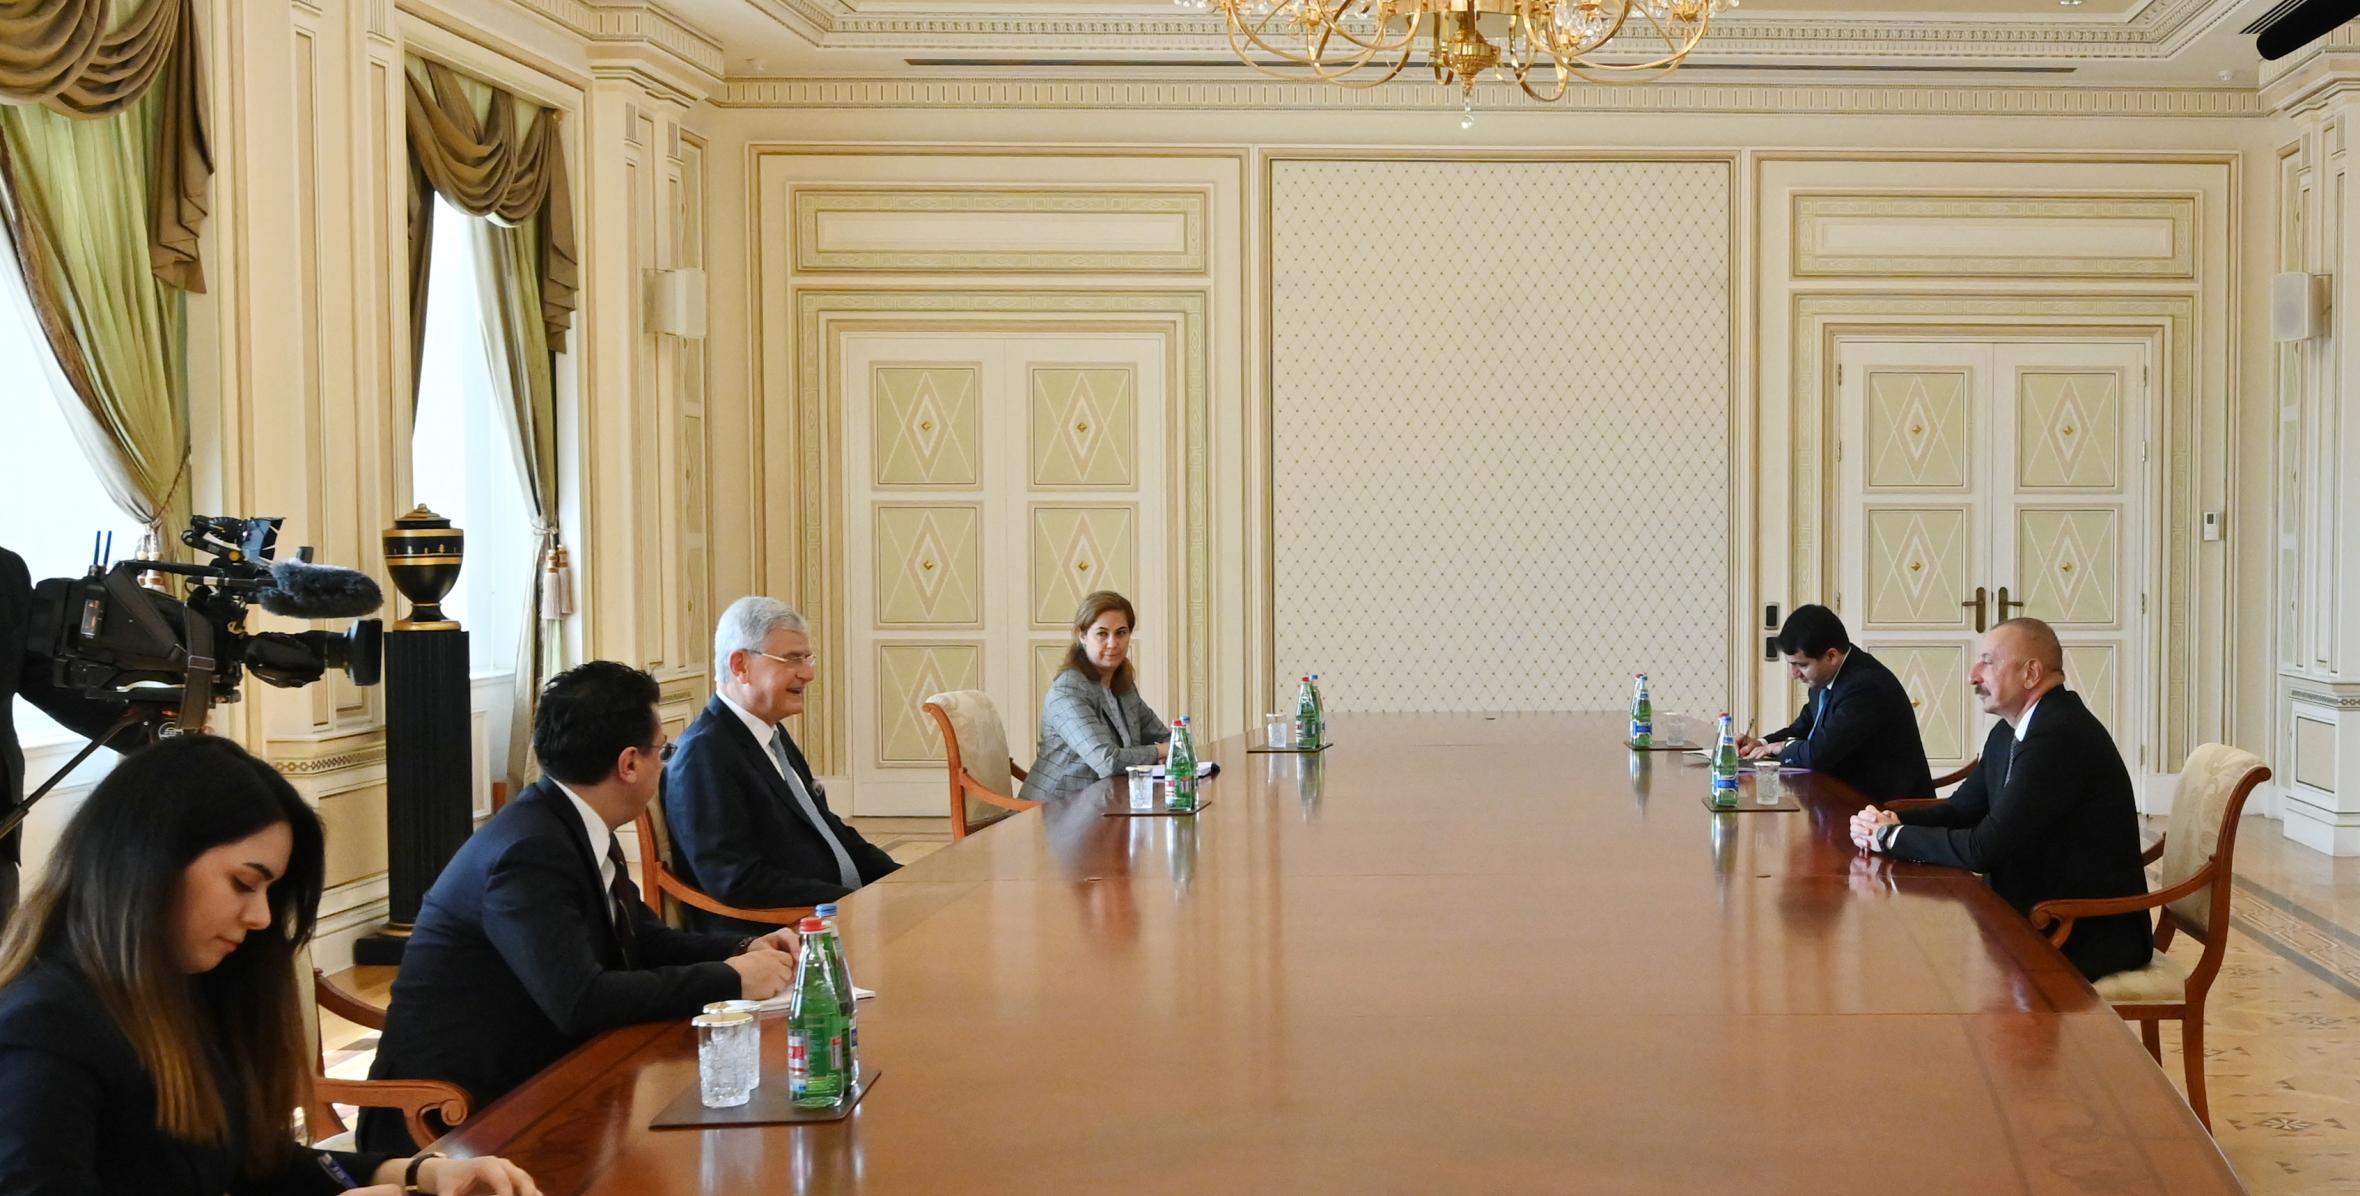 Ilham Aliyev received the President of the 75th session of the UN General Assembly